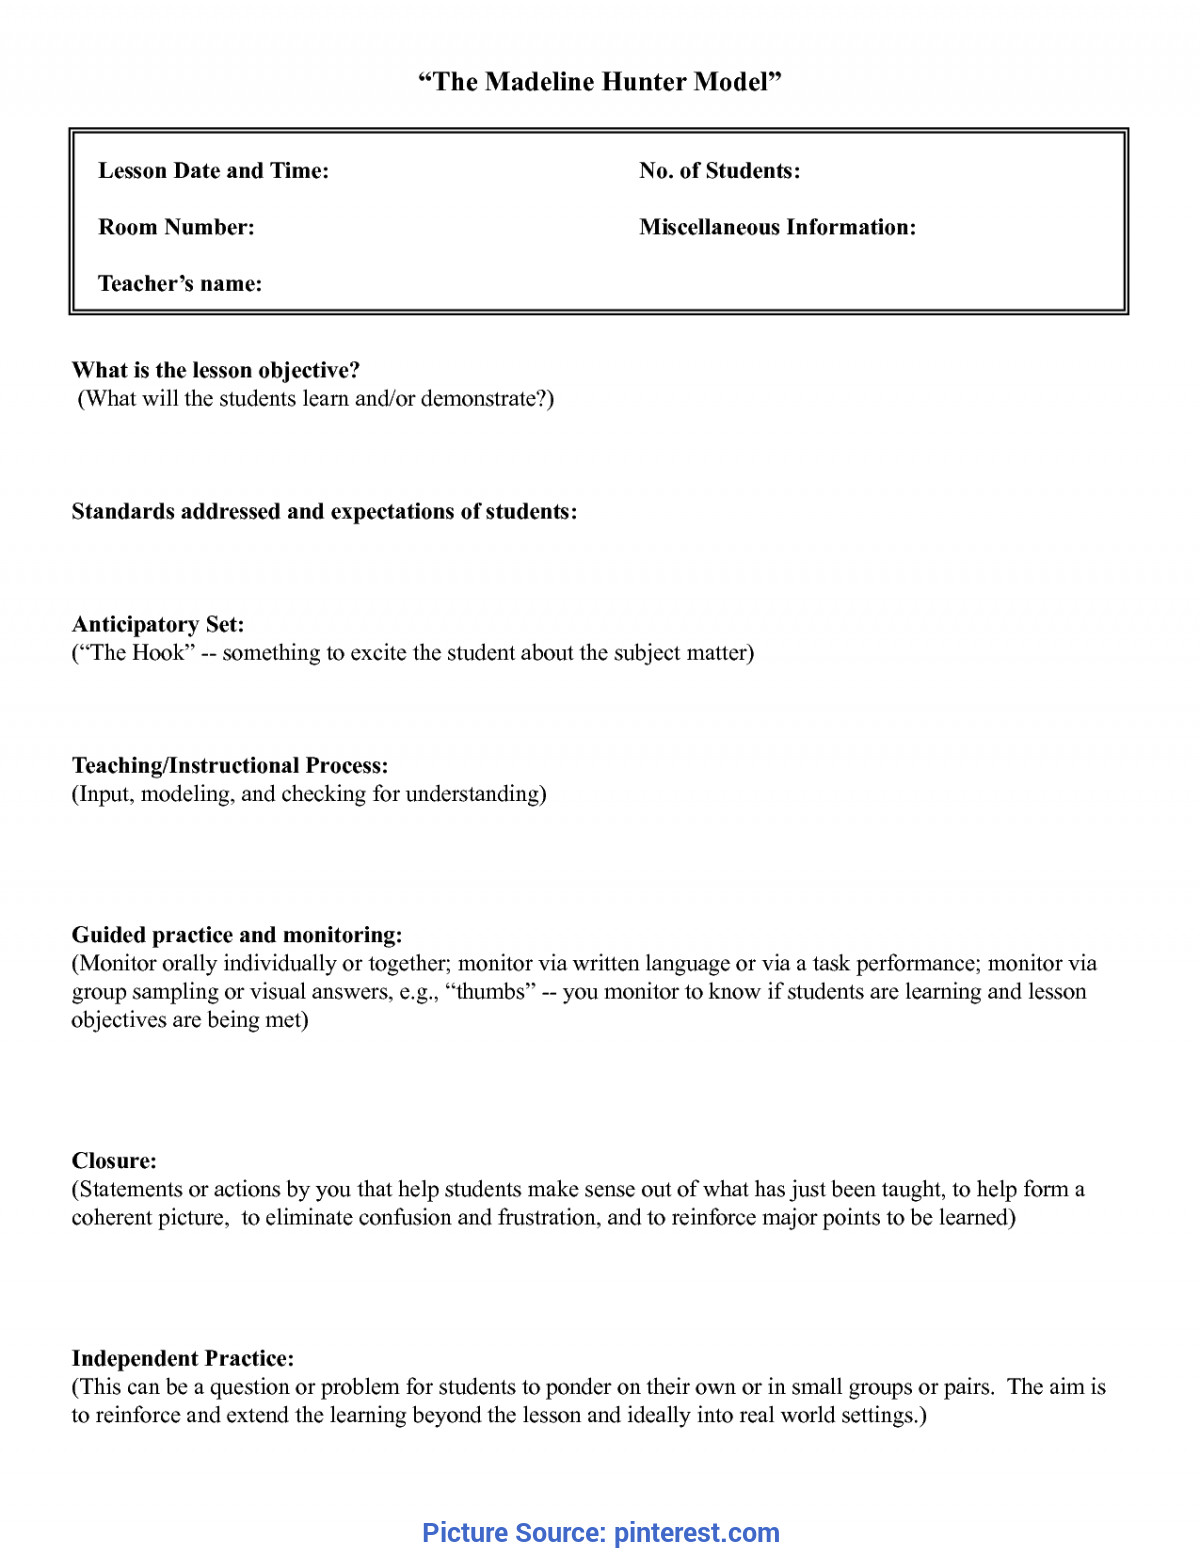 Madeline Hunter Lesson Plan Template Best High School Lesson Plan In Filipino Daily Lesson Log